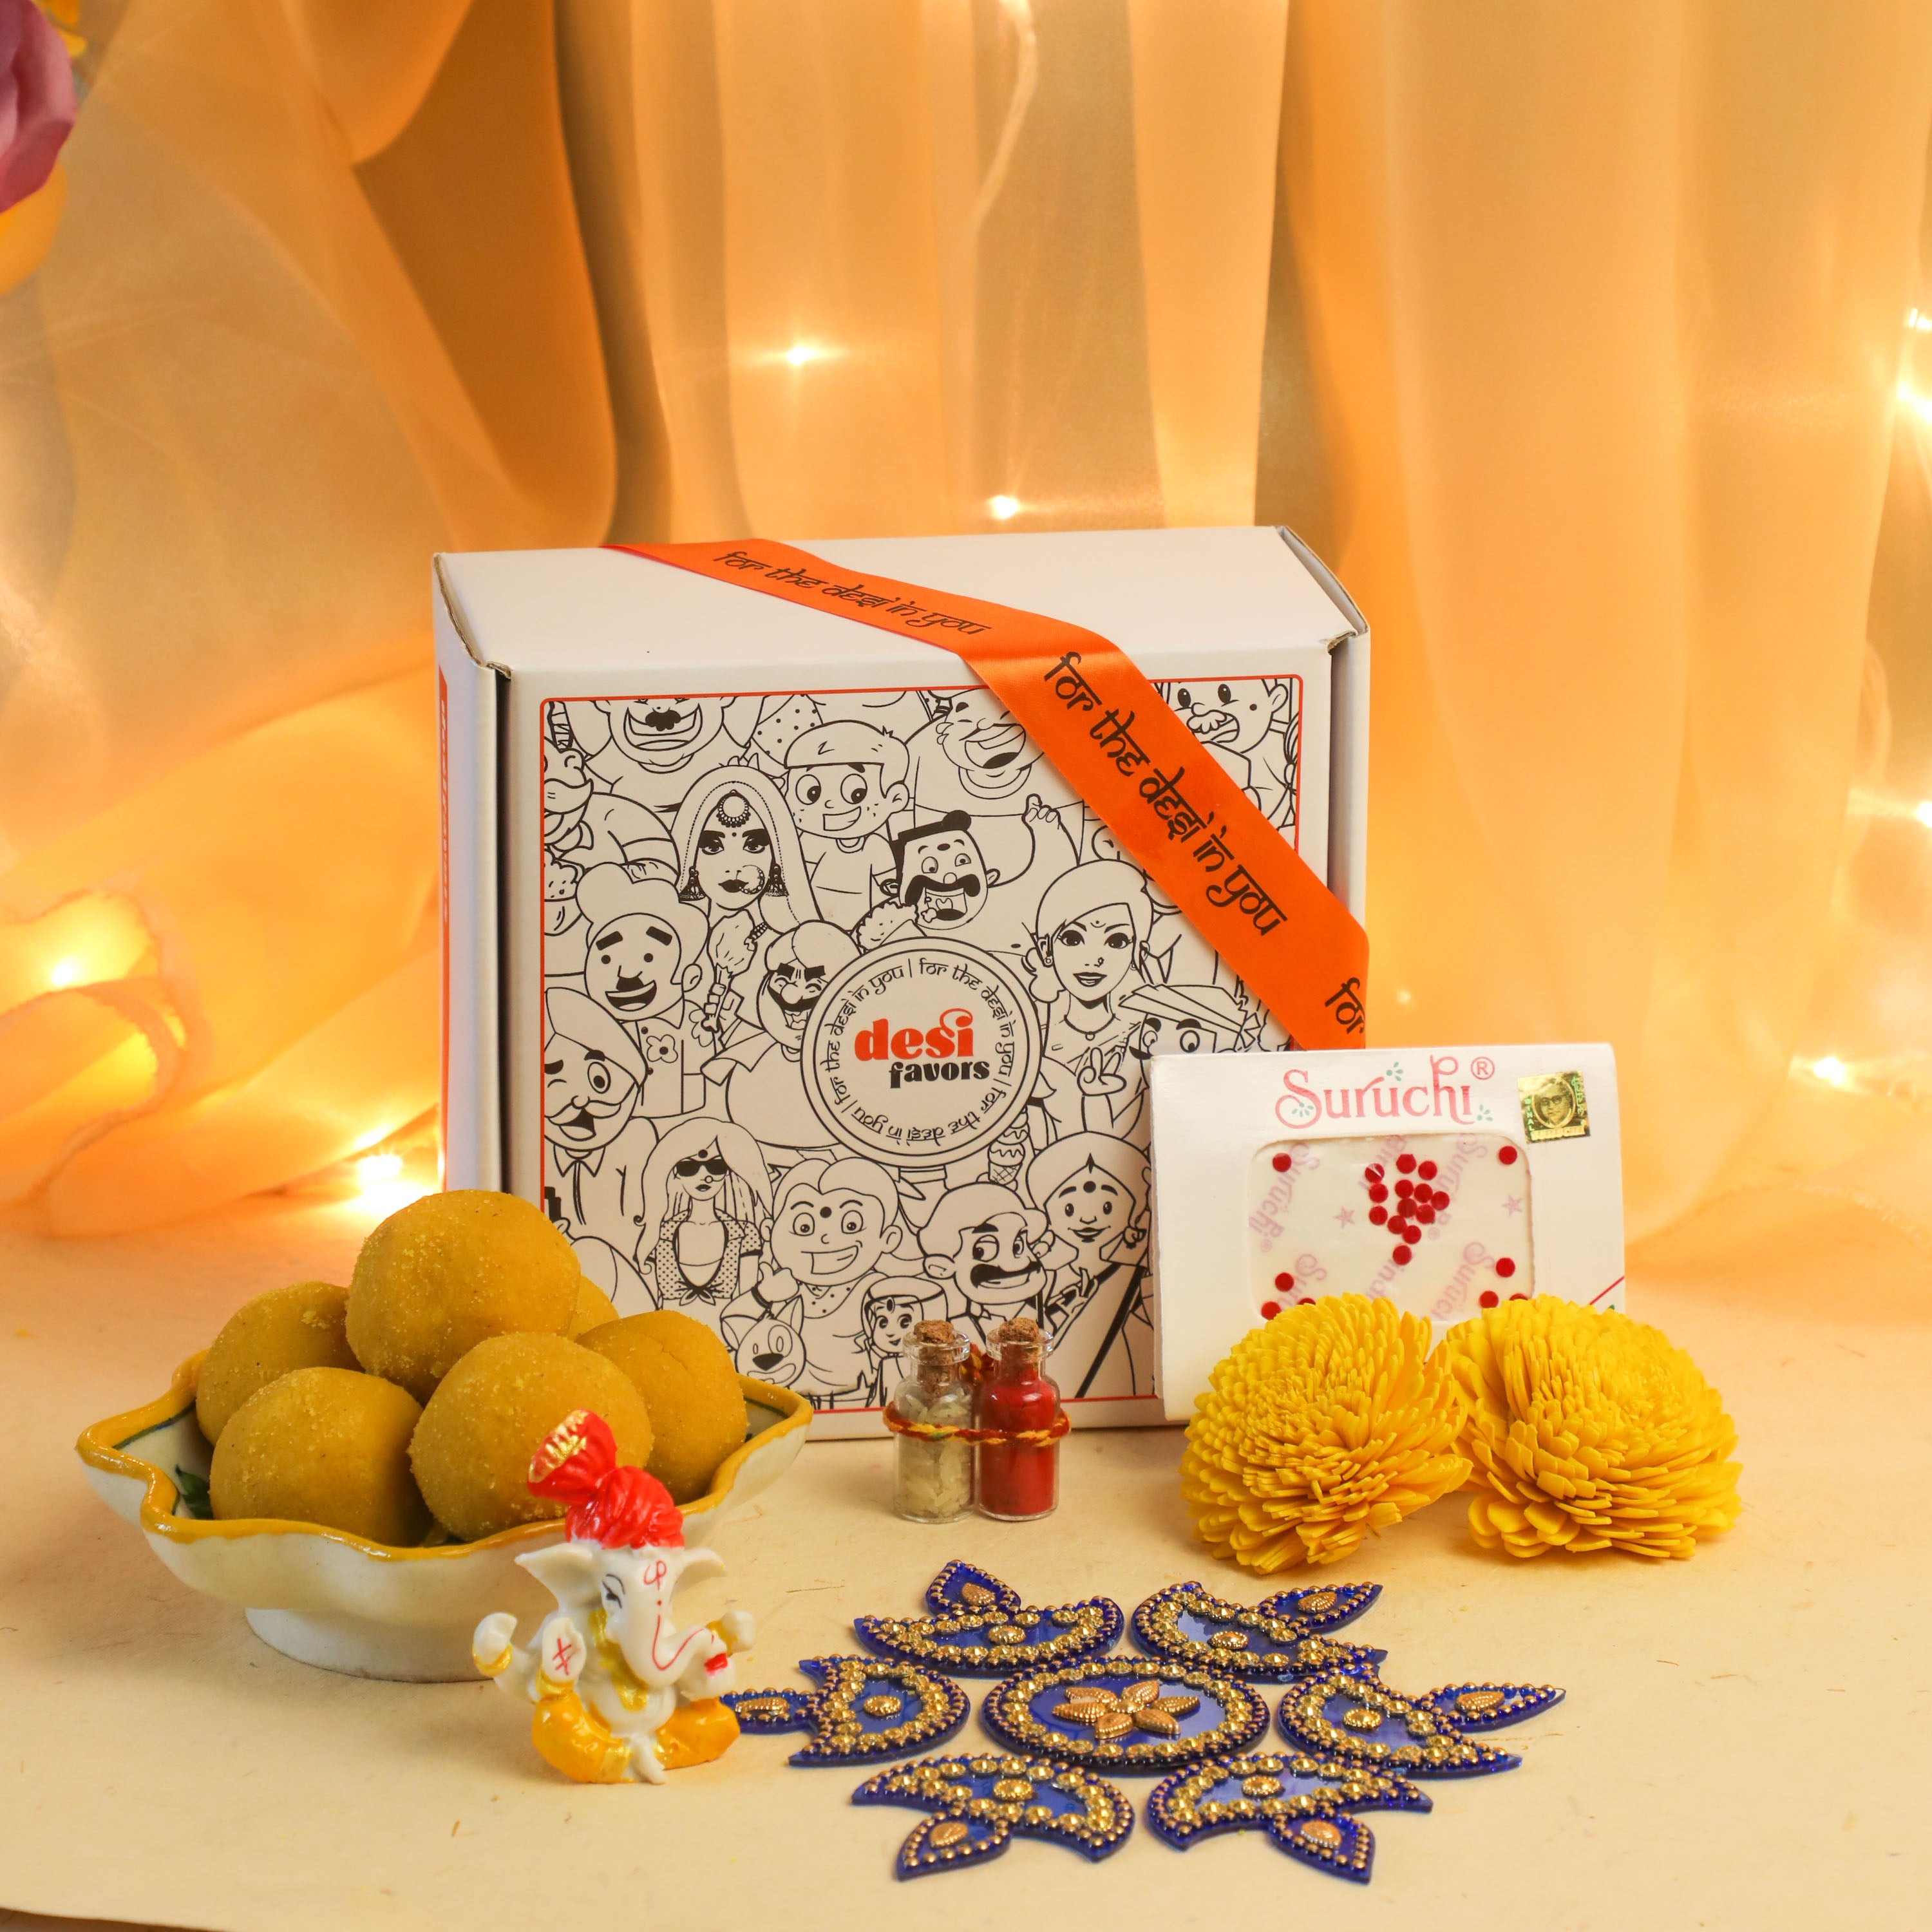 Midiron Festive Gift Hamper| Diwali gift Combo Pack| Diwali Gift set with  Handmade Chocolate Box, Diwali Card Gift for Friend, Family and Relatives :  Amazon.in: Grocery & Gourmet Foods